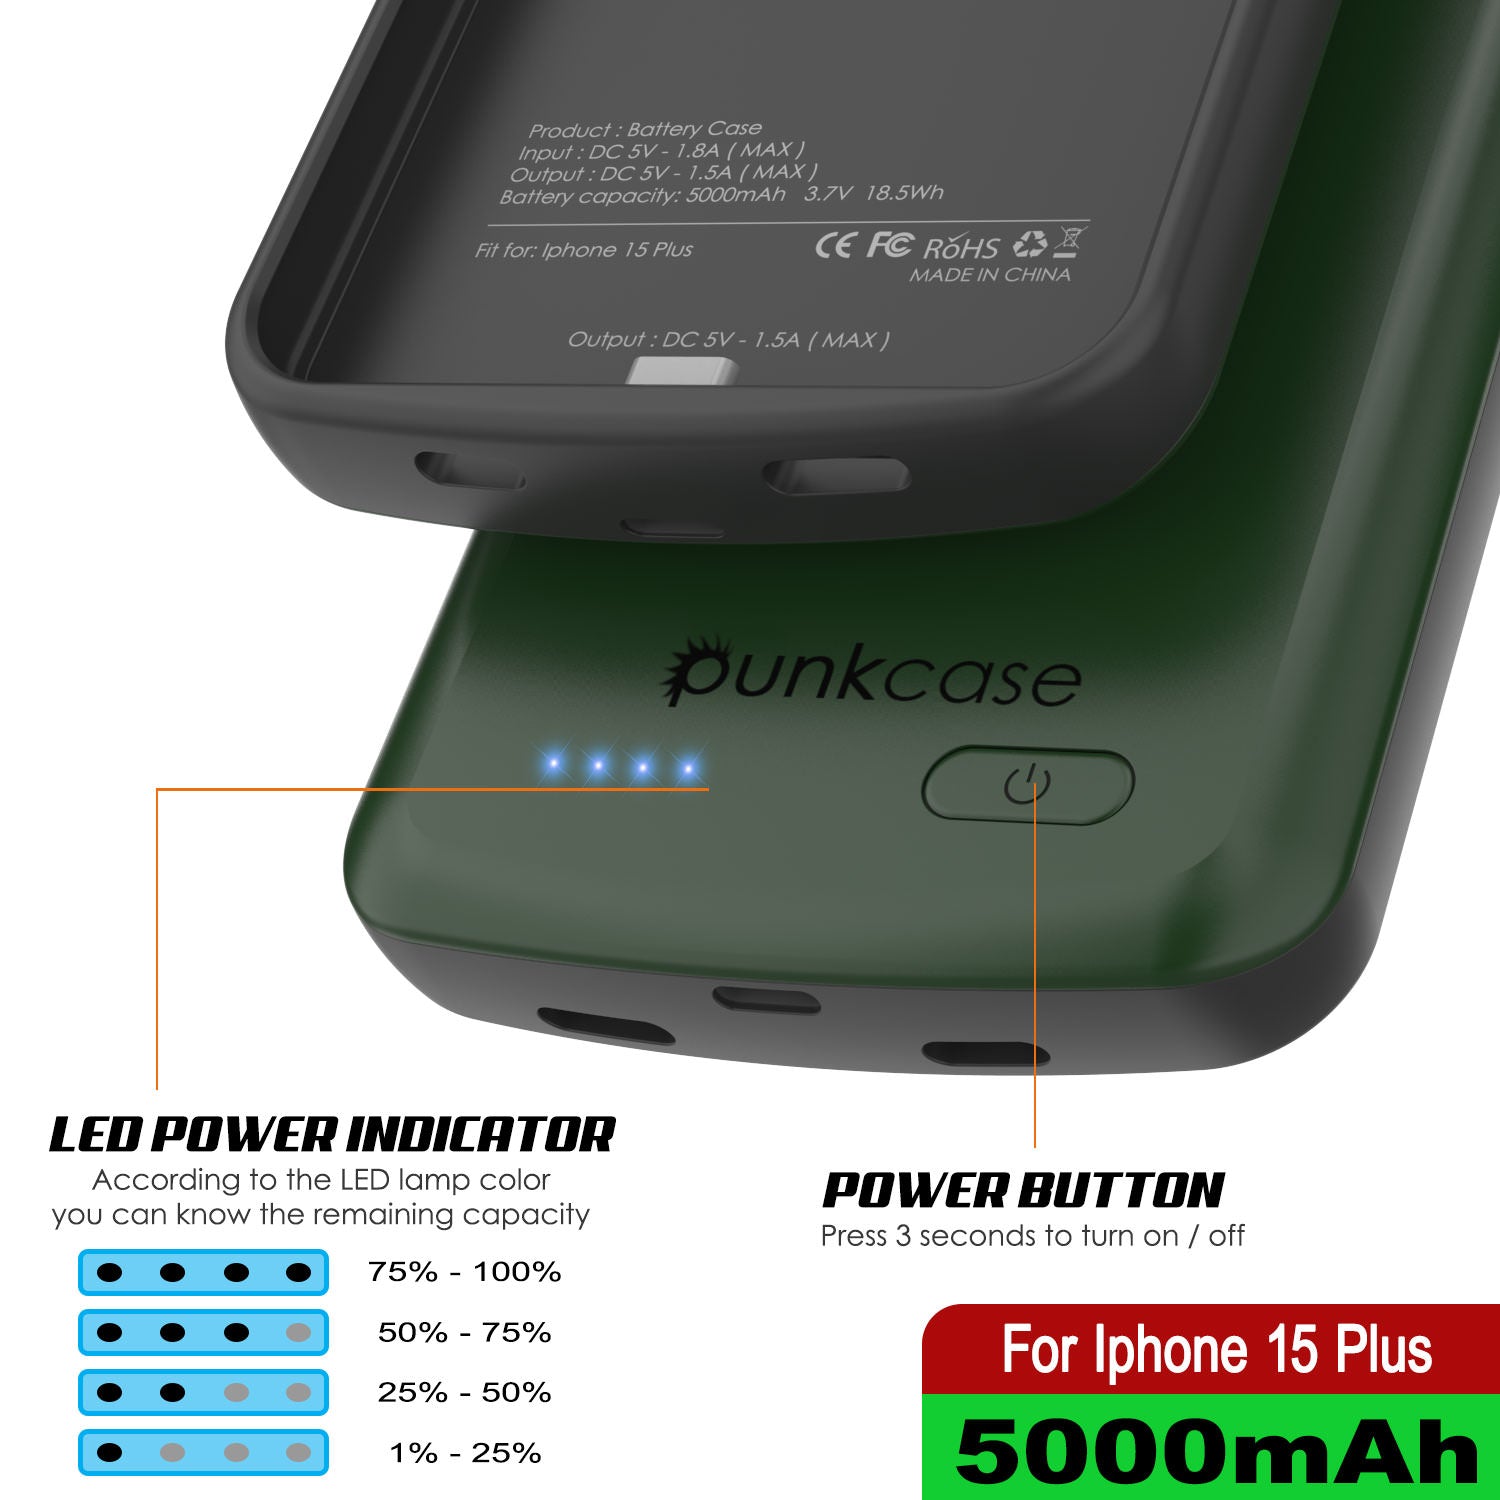 iPhone 15 Plus Battery Case, PunkJuice 5000mAH Fast Charging Power Bank W/ Screen Protector | [Green]